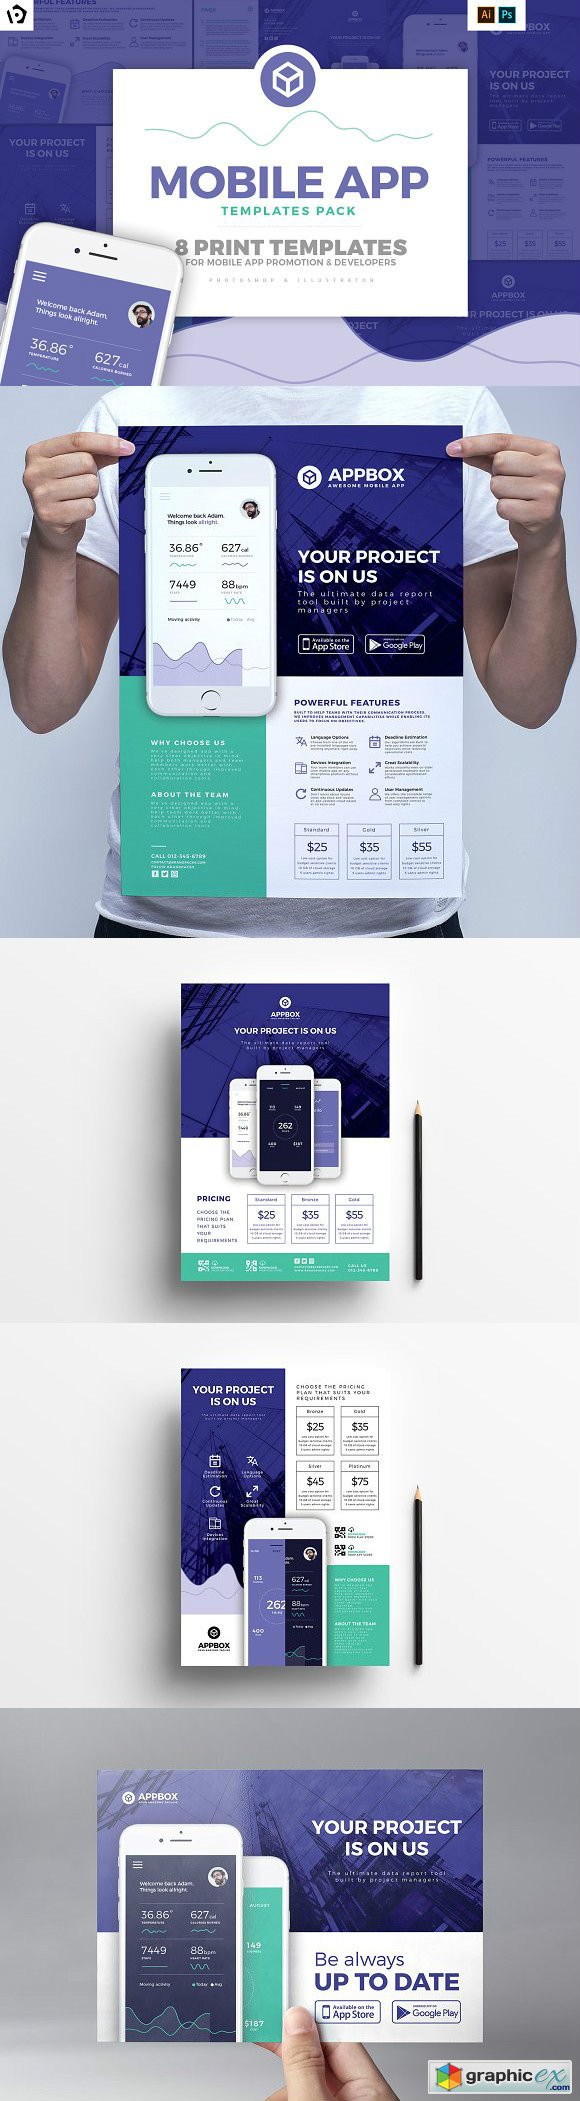 Mobile App Templates Pack